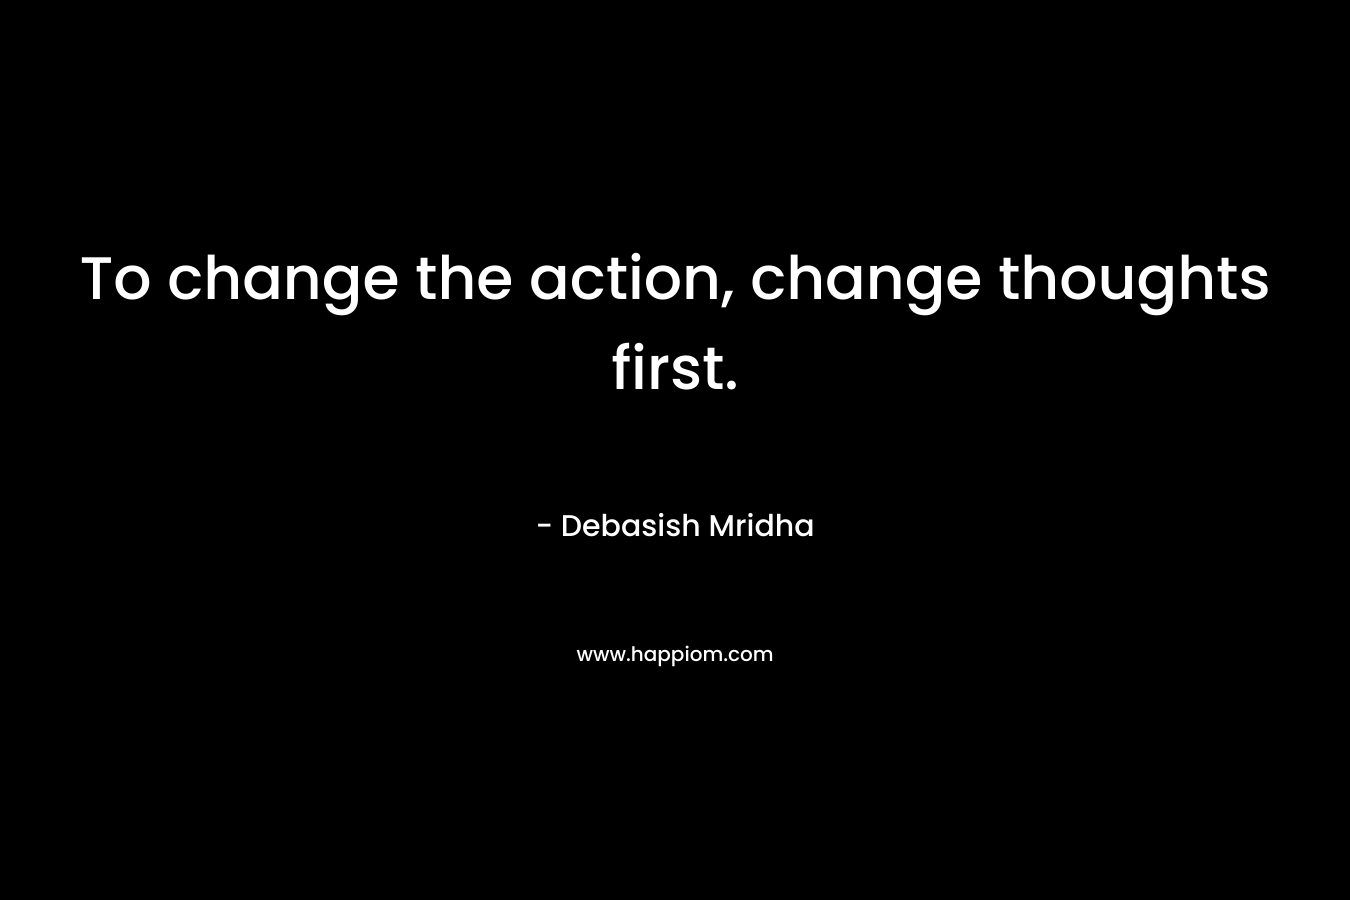 To change the action, change thoughts first.